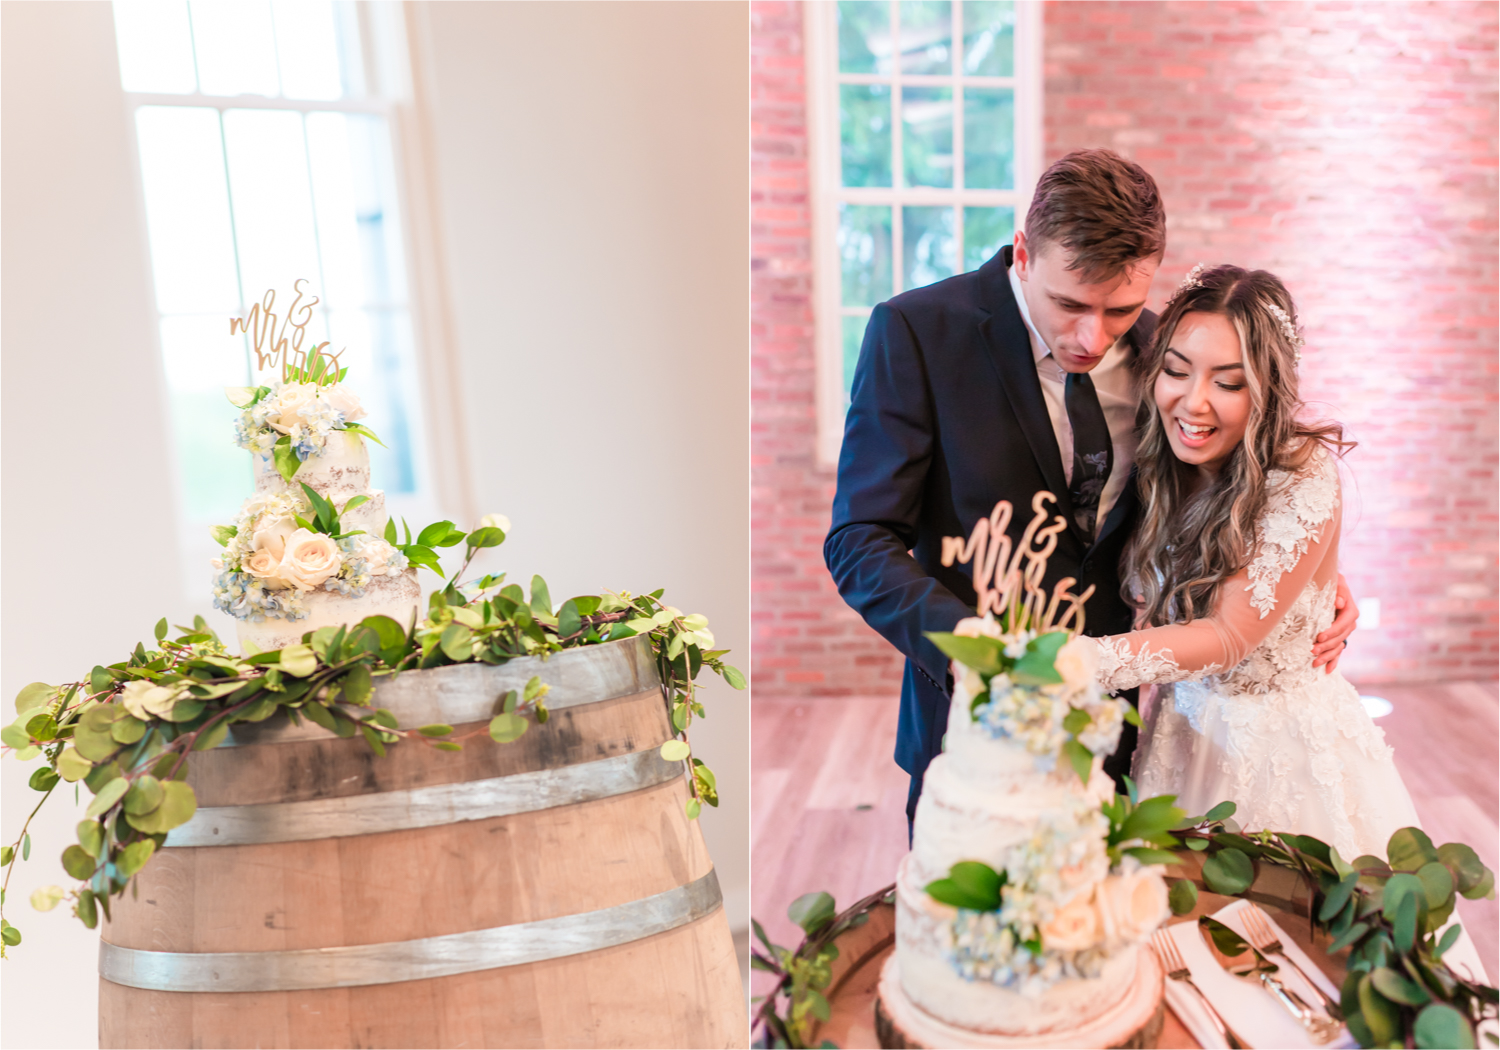 Romantic and Rustic Wedding at The Mill in Windsor | Britni Girard Photography | Colorado based wedding photography and videography team | Cake cutting with live singer